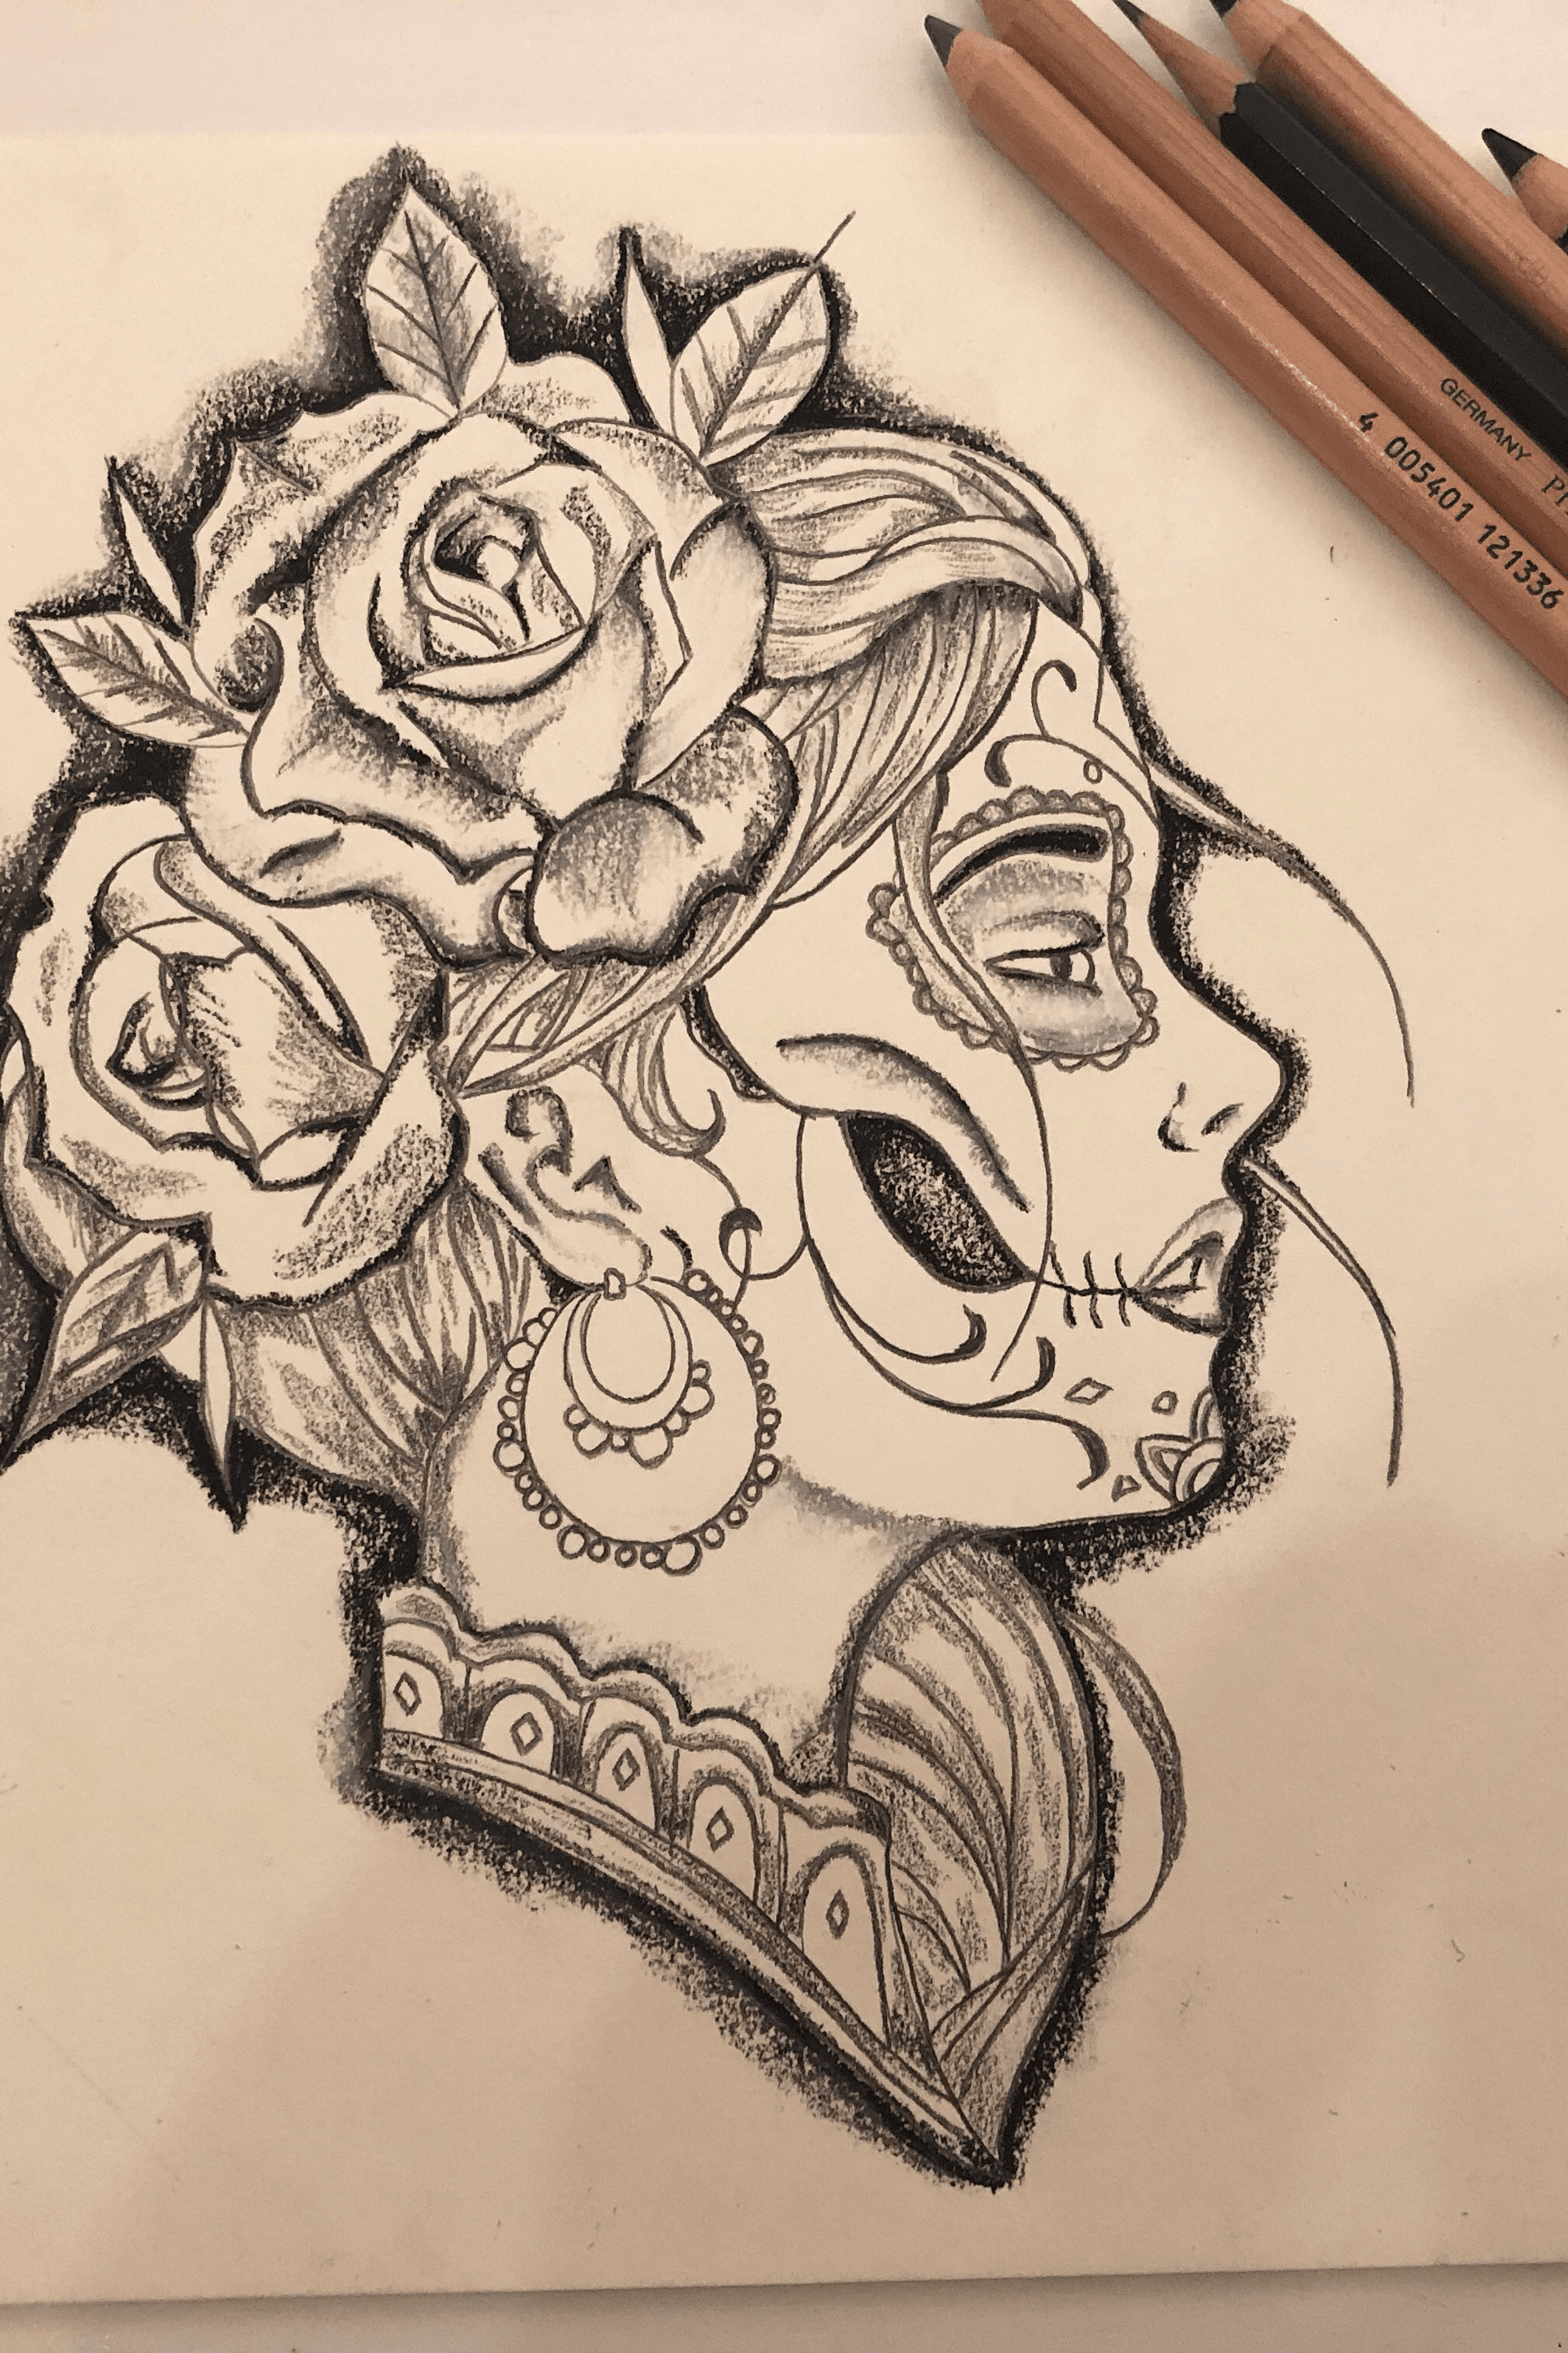 cool drawings of roses and skulls